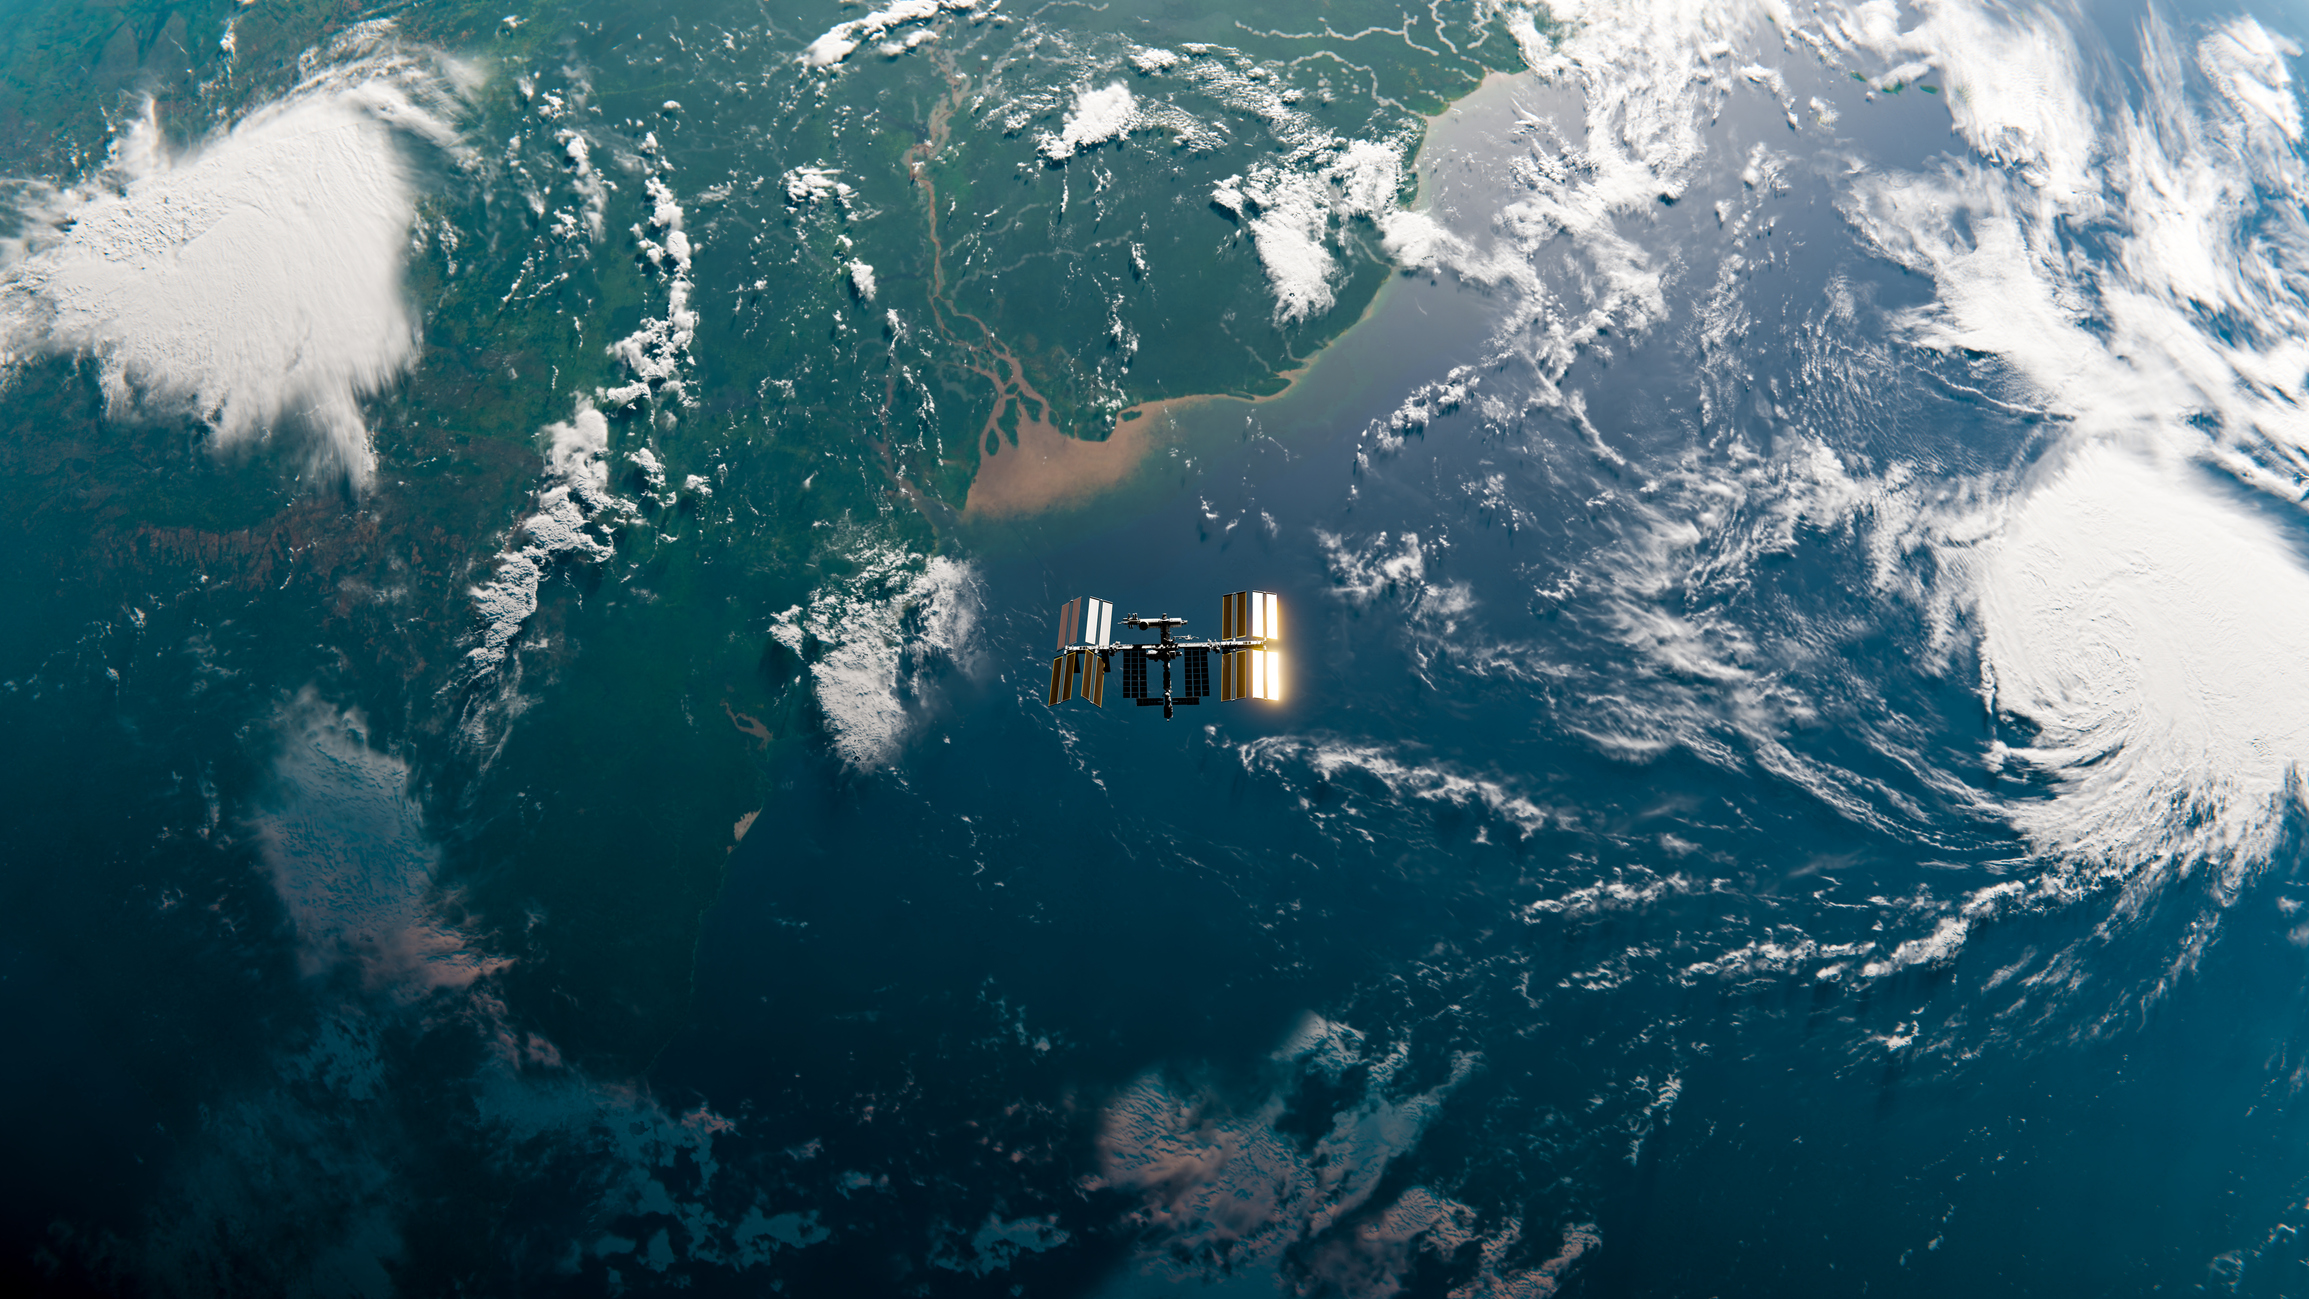 International Space Station (ISS) Orbit in Space over Amazon River - SpaceX & NASA Research - 3D Rendering